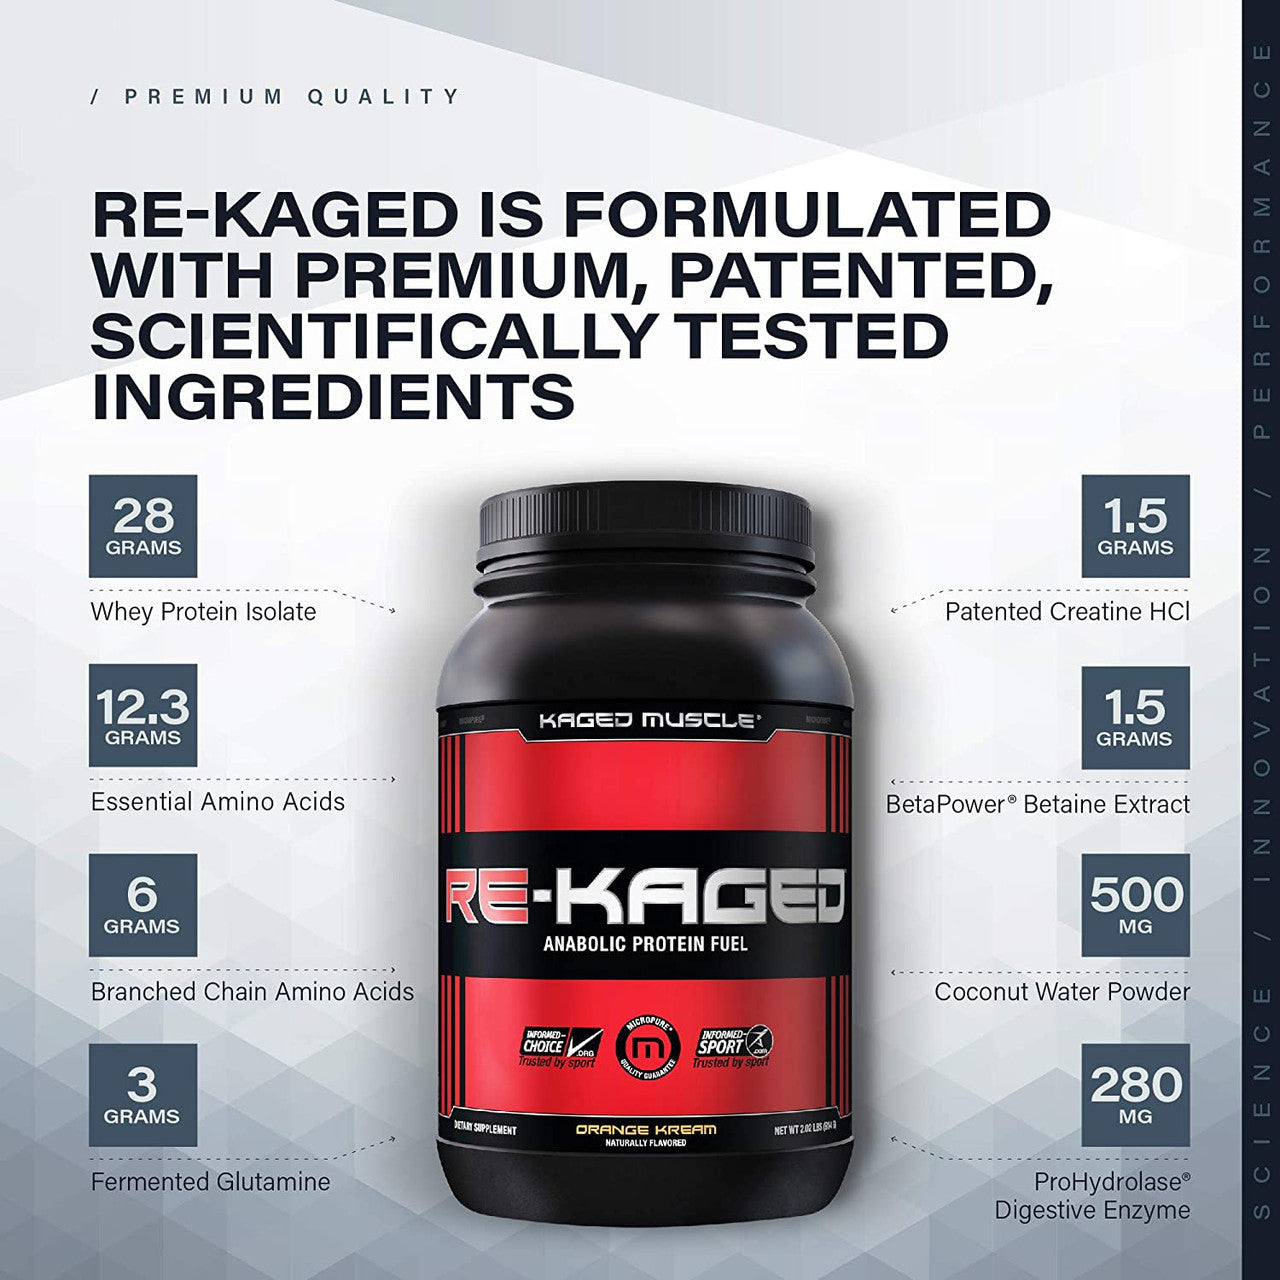 Kaged Muscle Re-Kaged nutritional information